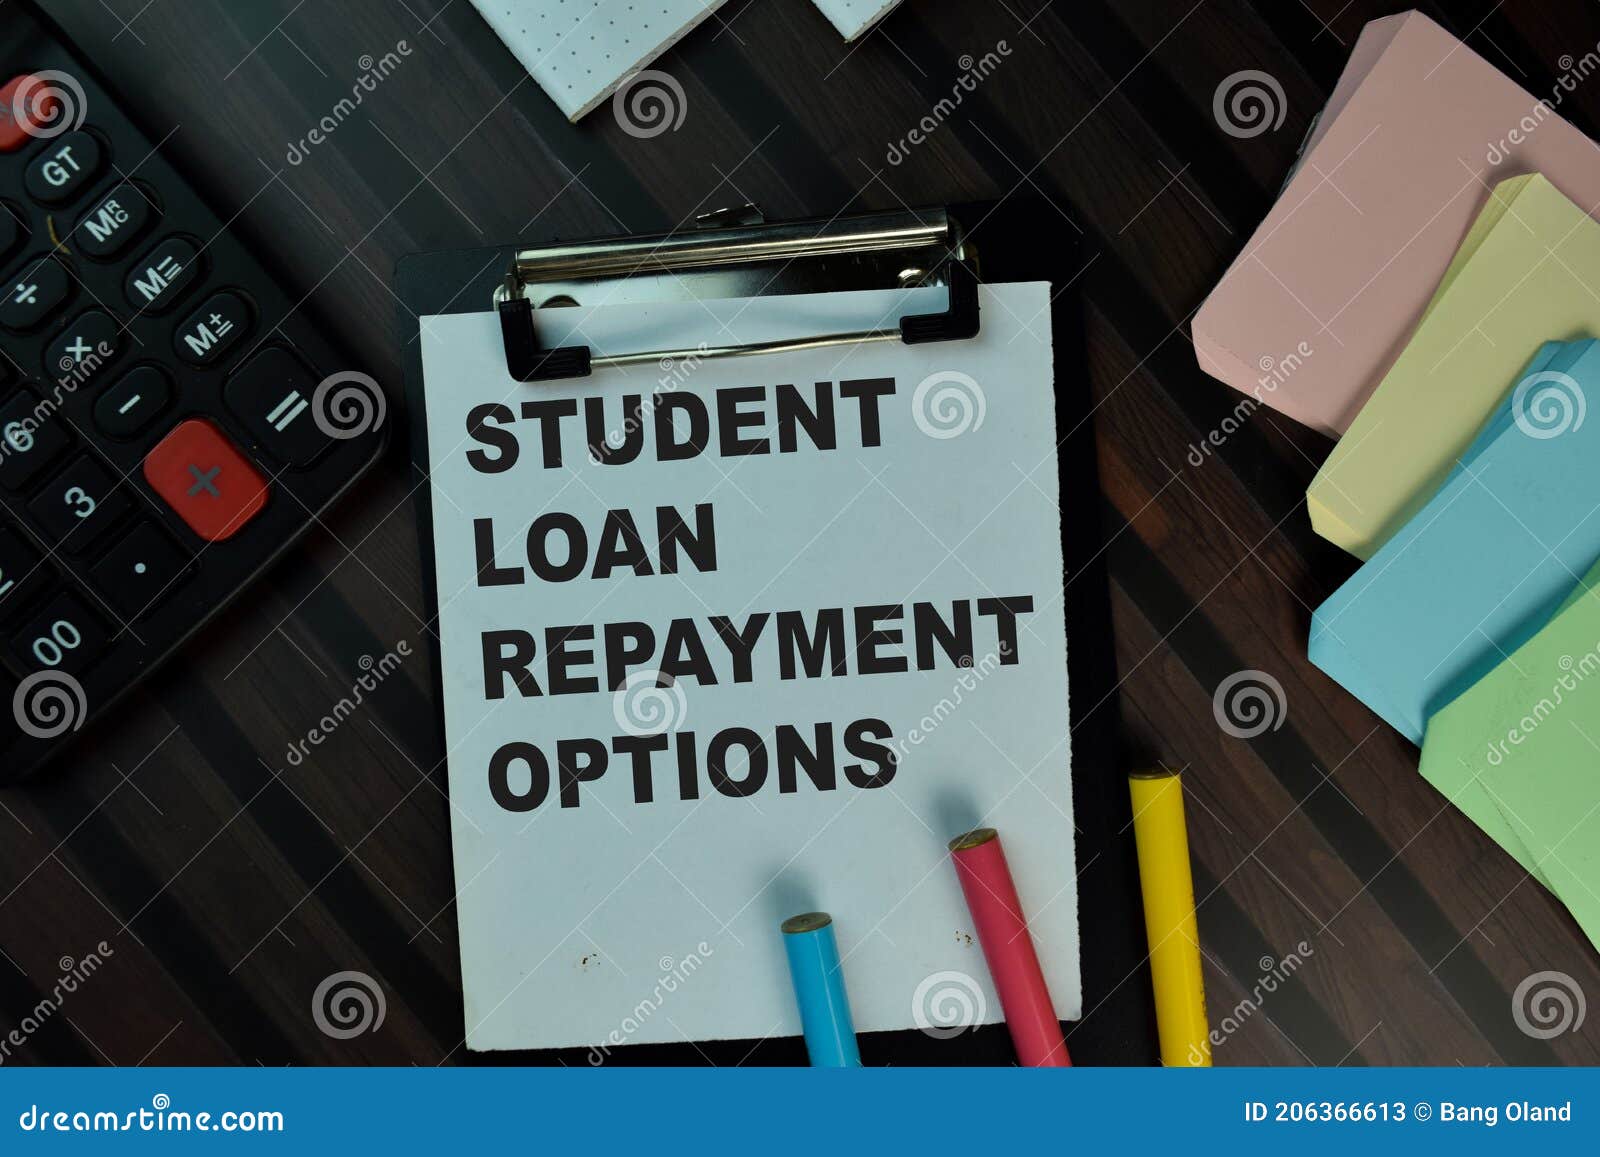 Student Loan Repayment Options Write on a Paperwork Isolated on Wooden ...